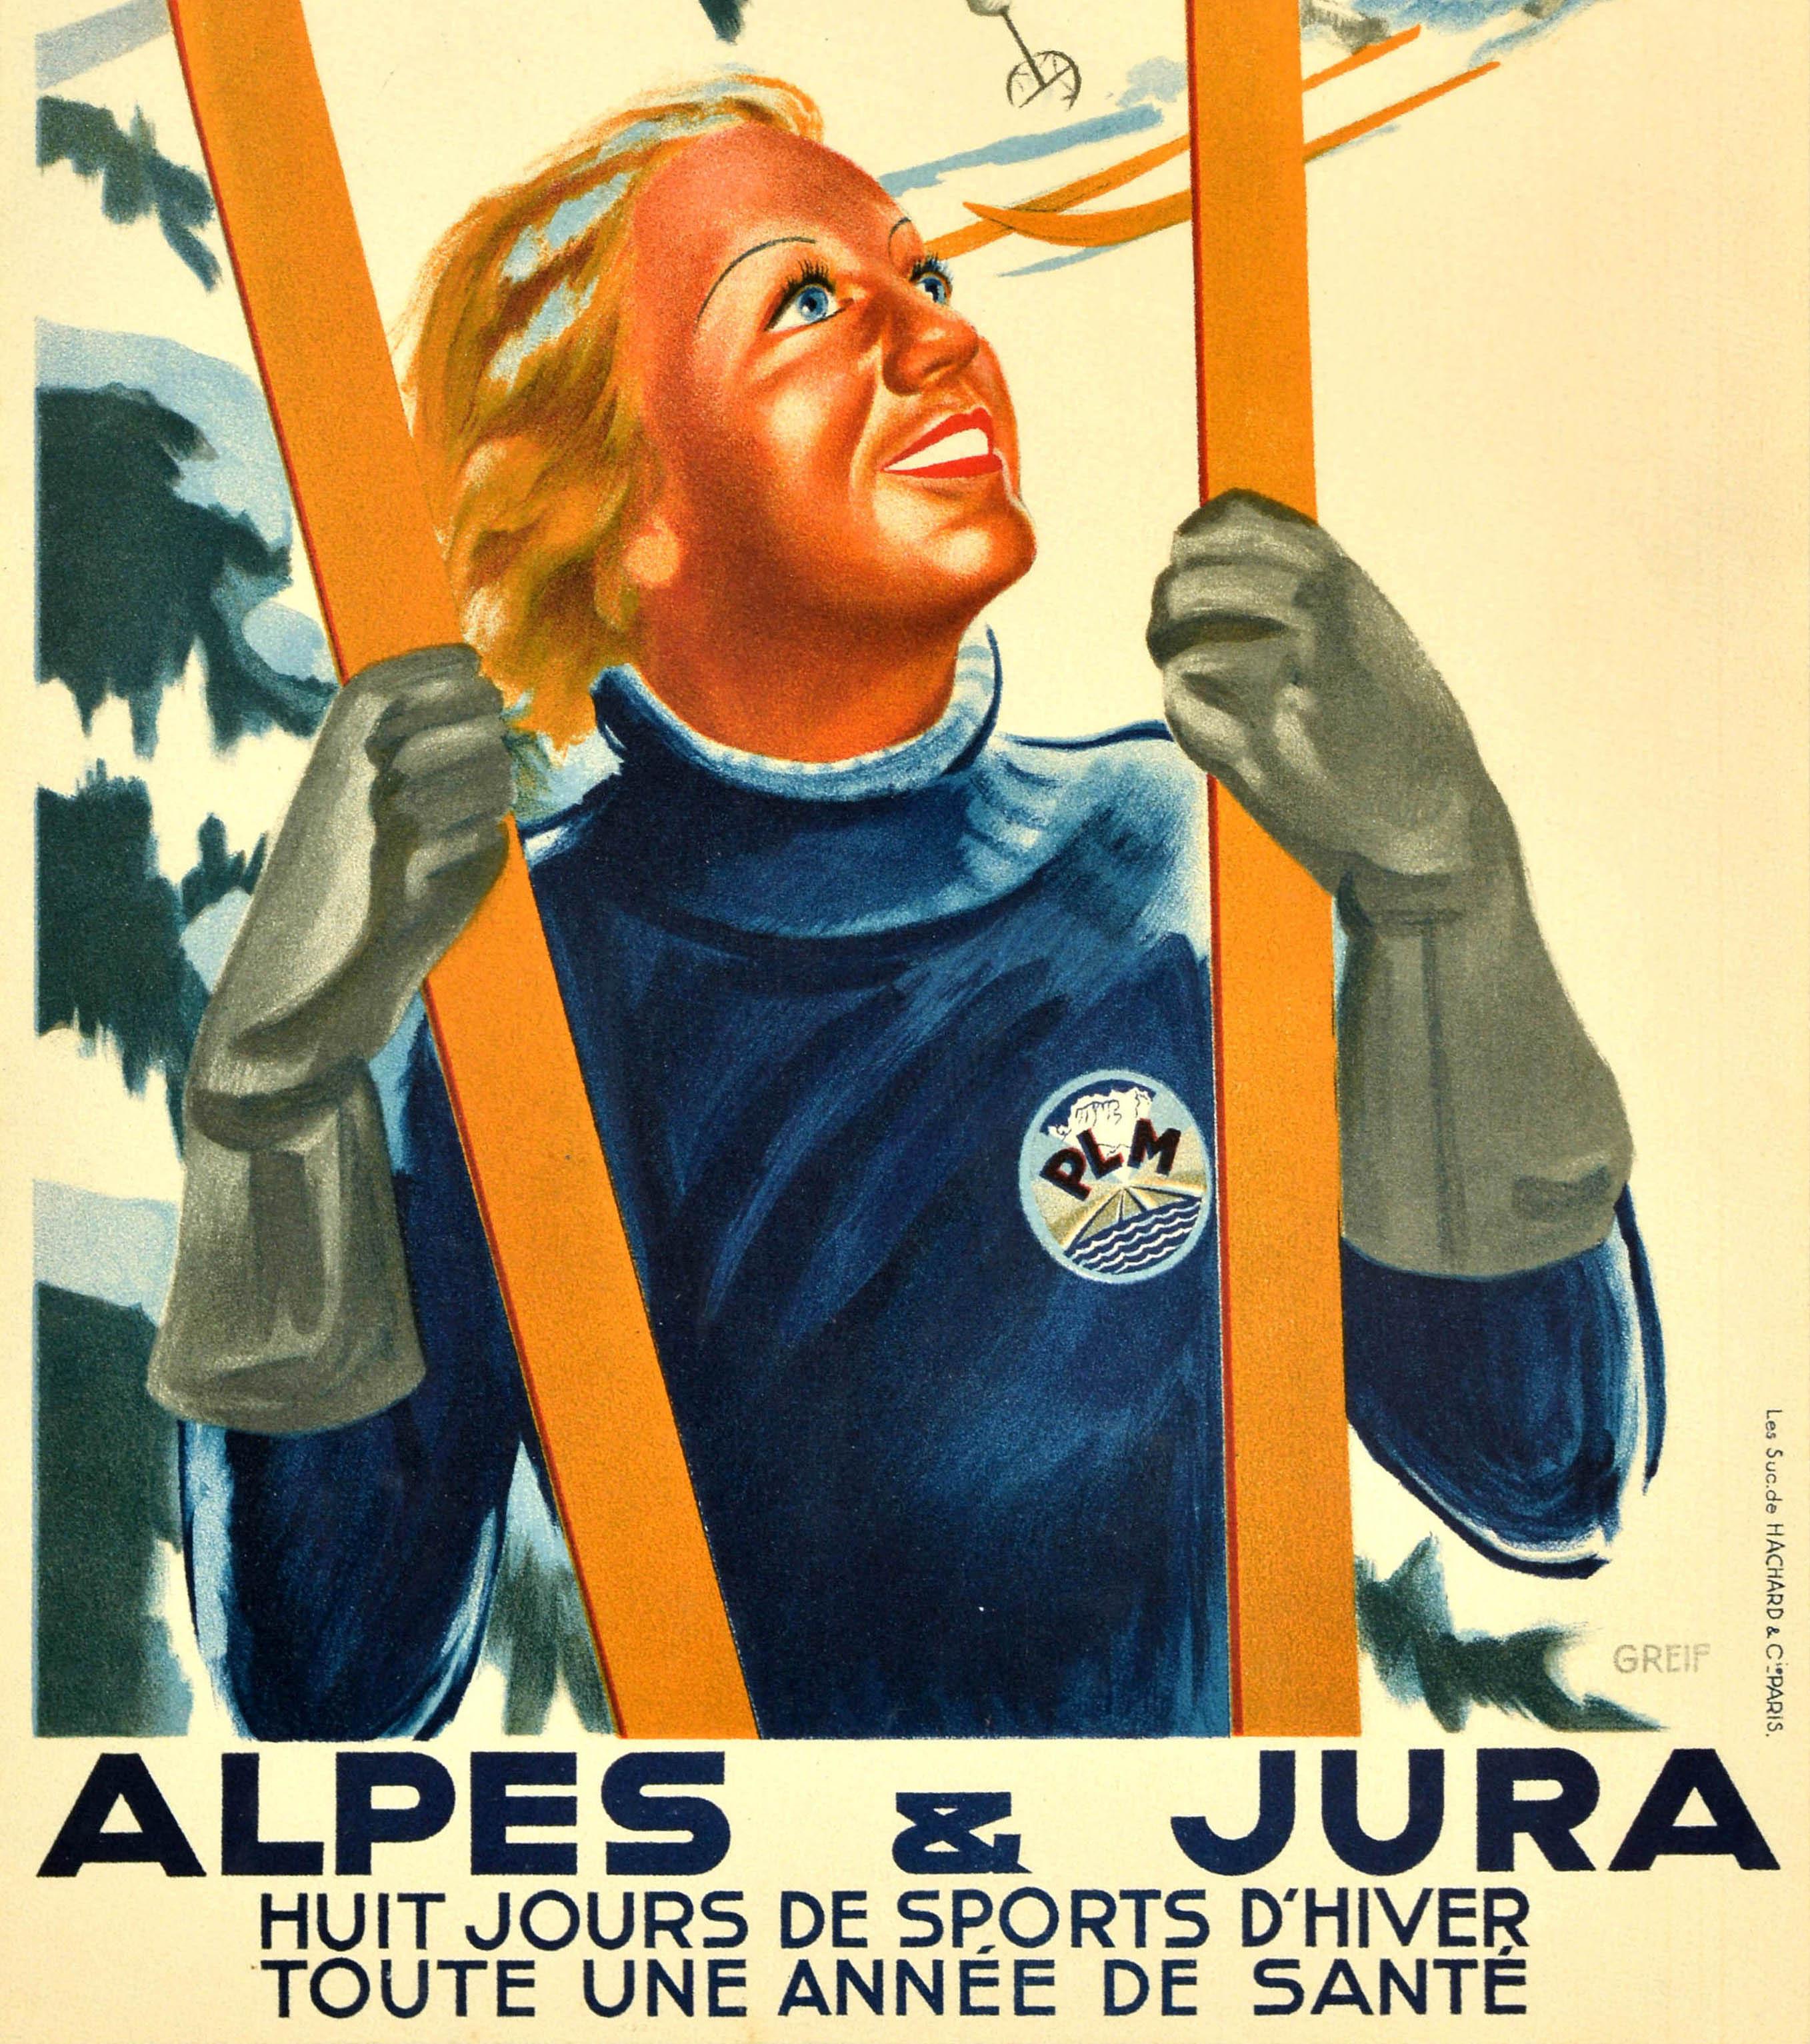 Original Vintage Winter Sport Skiing Travel Poster Alpes And Jura PLM Railway In Good Condition For Sale In London, GB